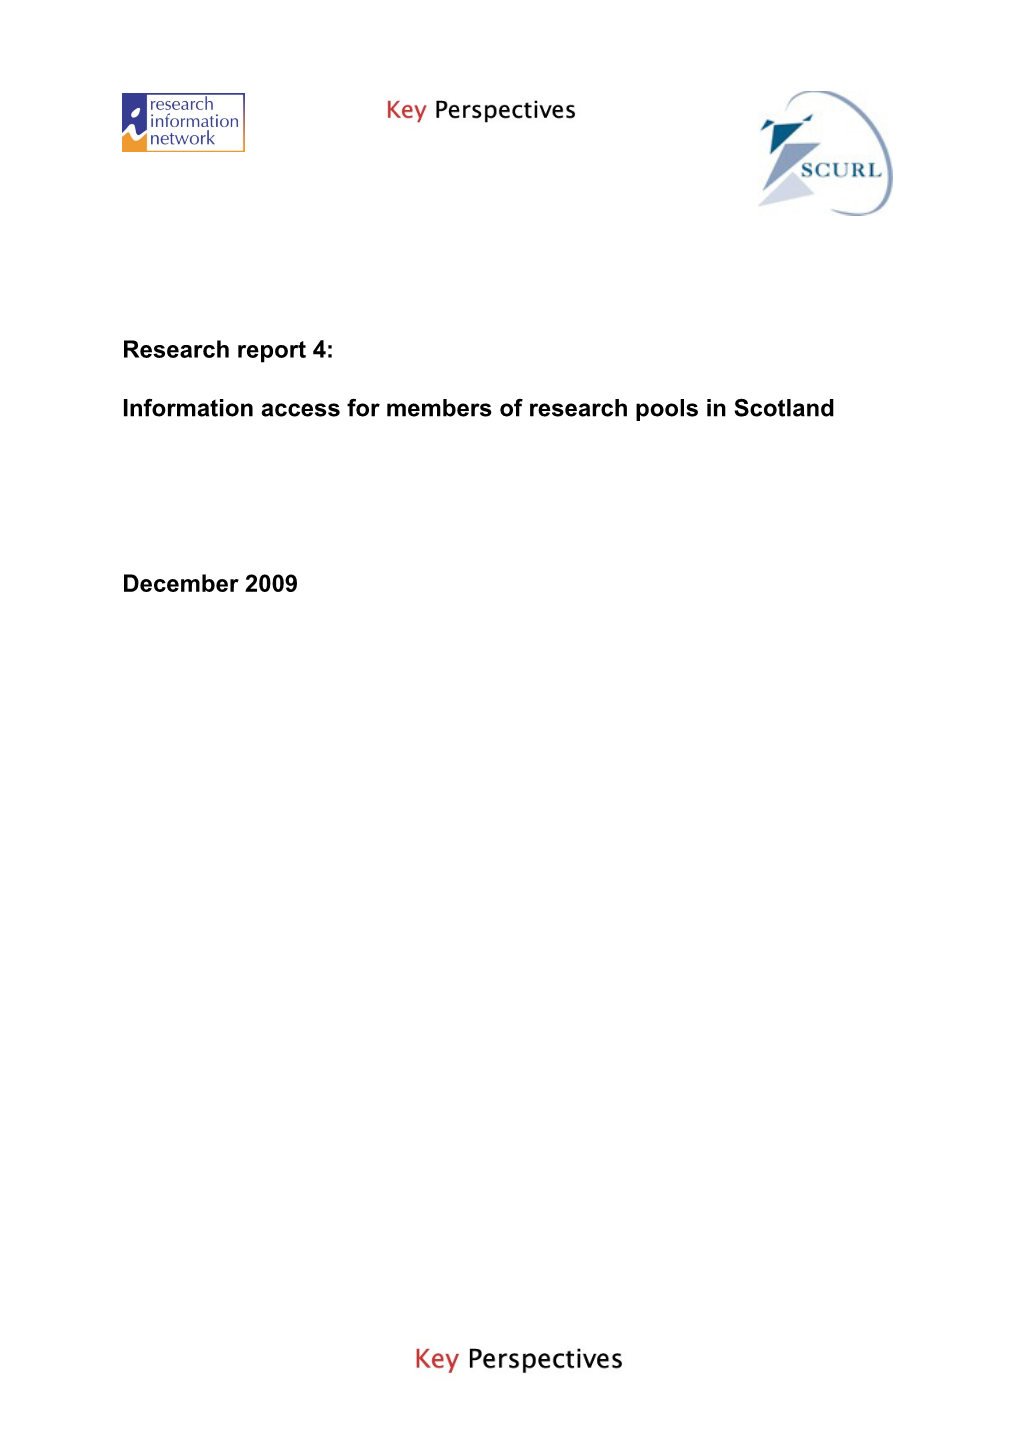 Information Access for Members of Research Pools in Scotland